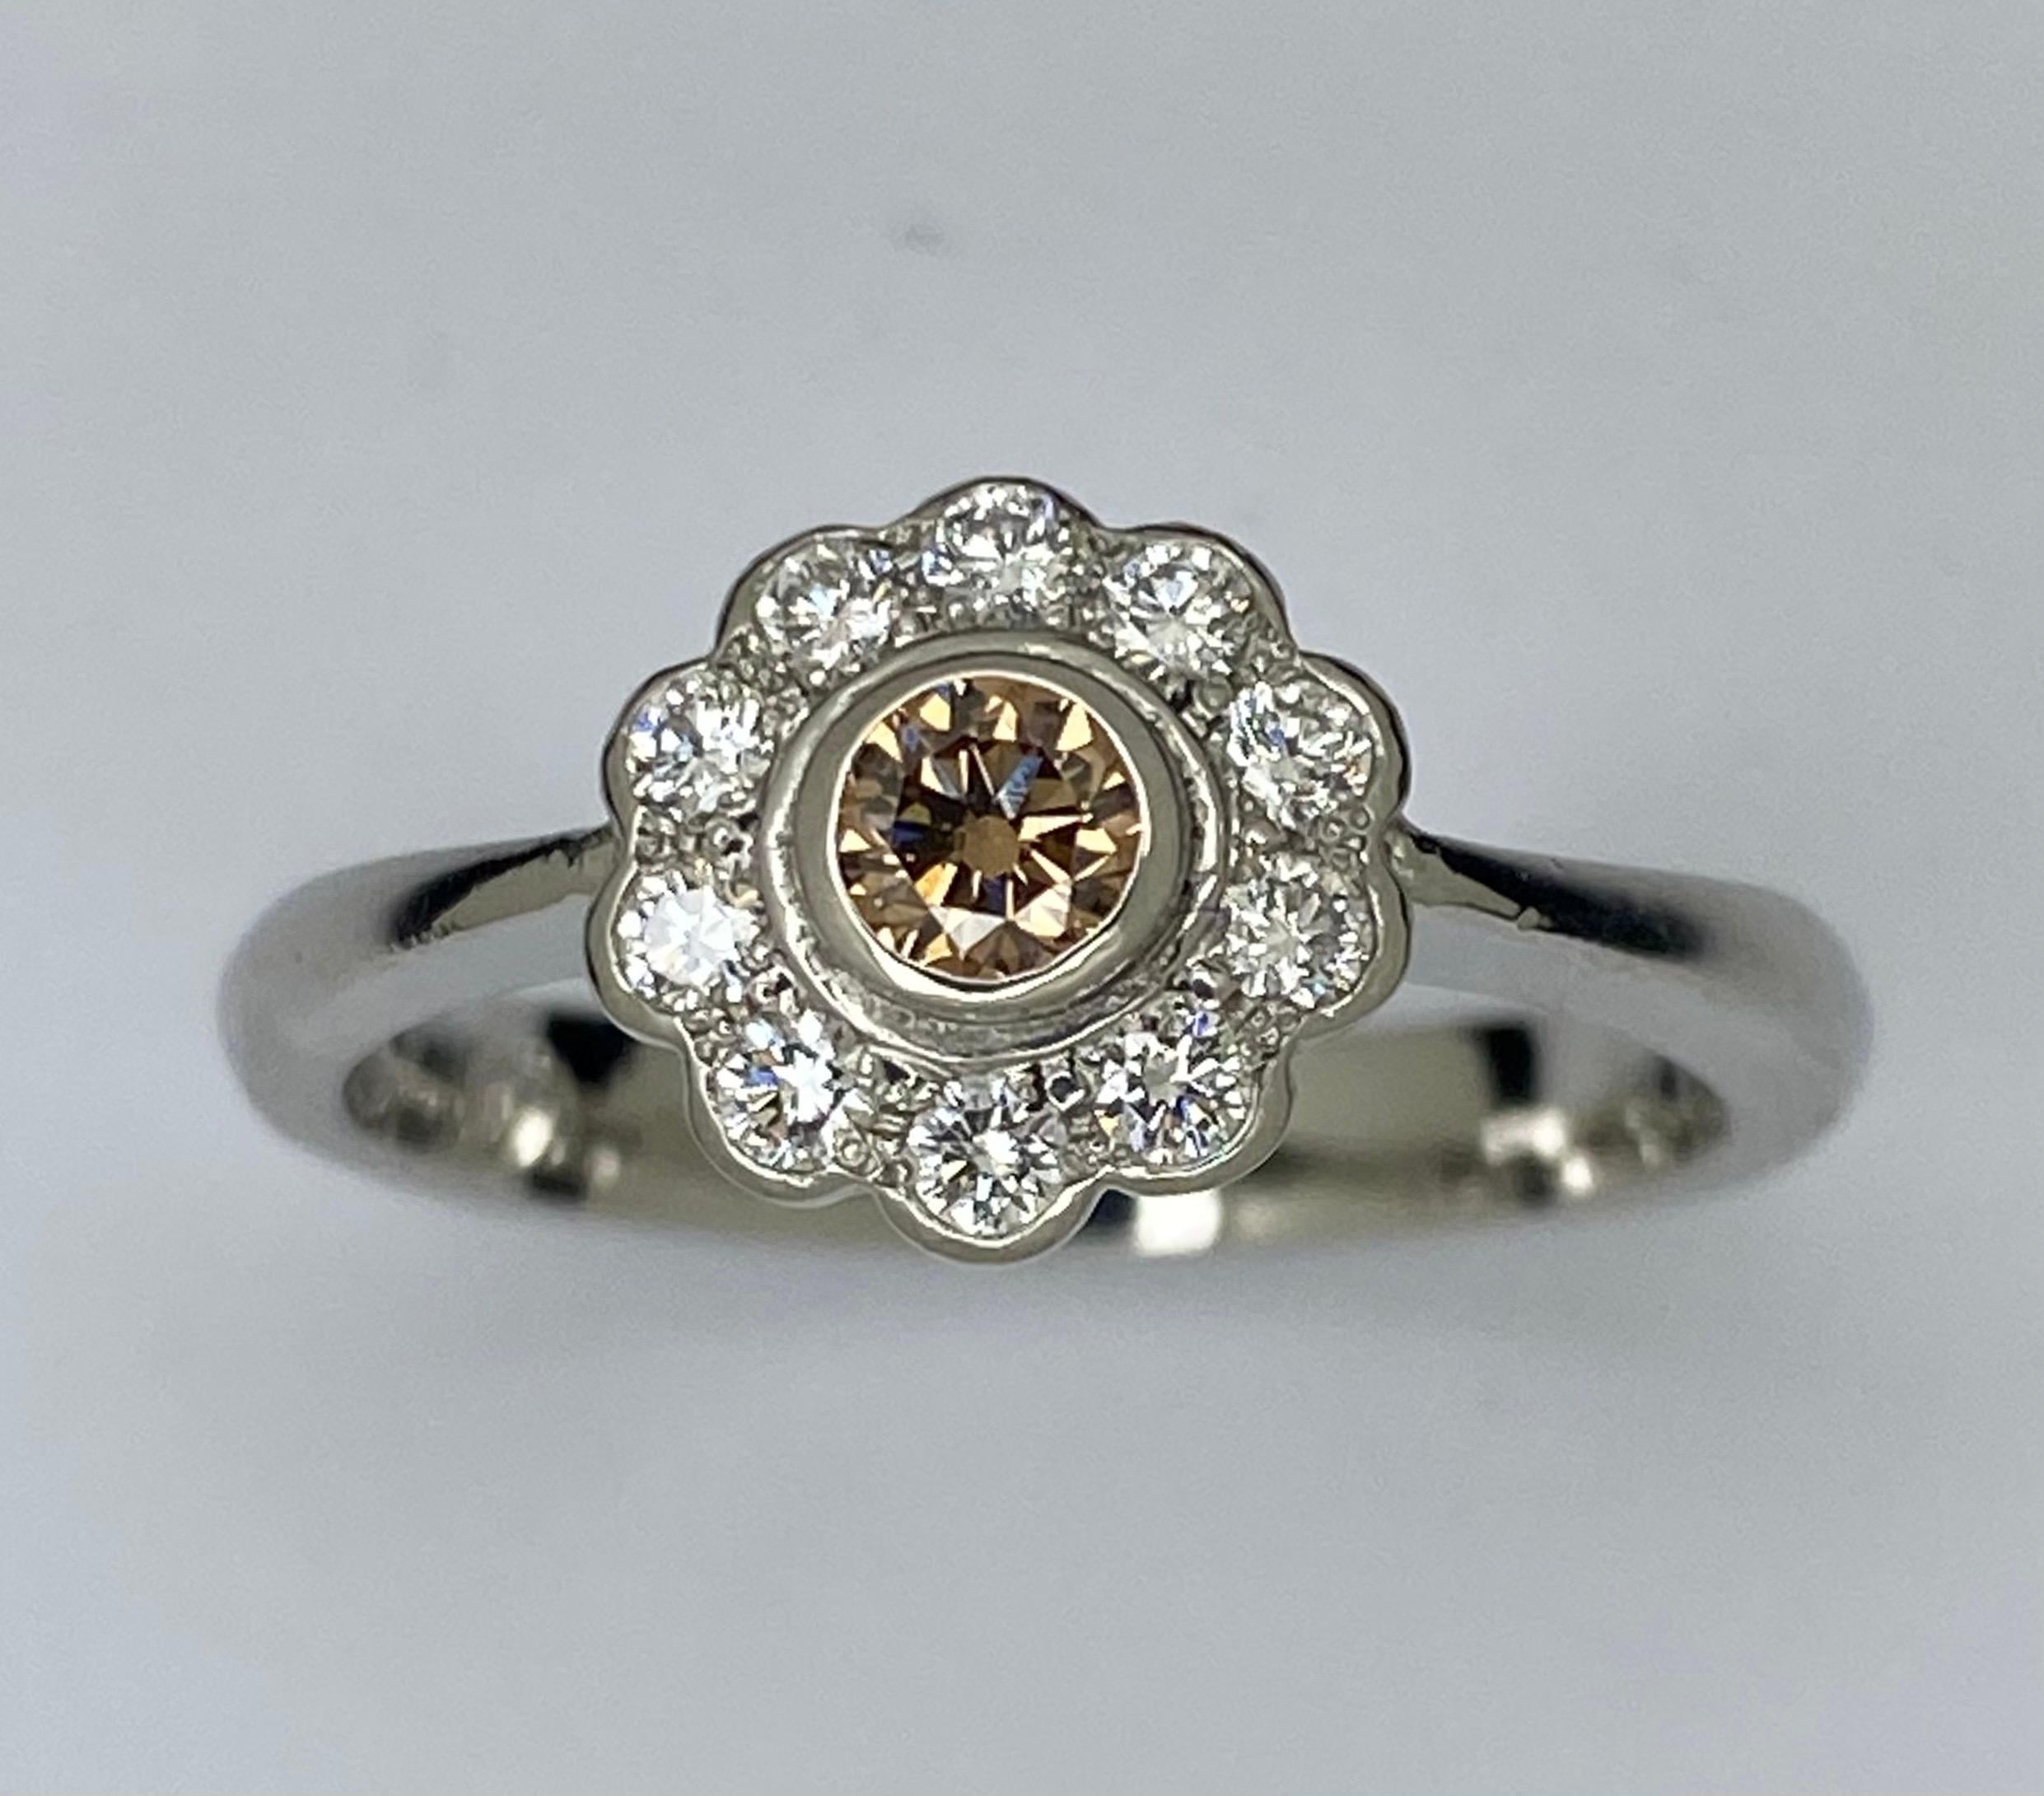 Platinum Cognac Diamond Cluster Ring

Daisy cluster design with a showcase of cognac diamond surrounding with 10 colourless diamond forming a cluster head. Band stamped 950, round shaped kangaroo head and maker stamp

Total diamond weight: 0.37